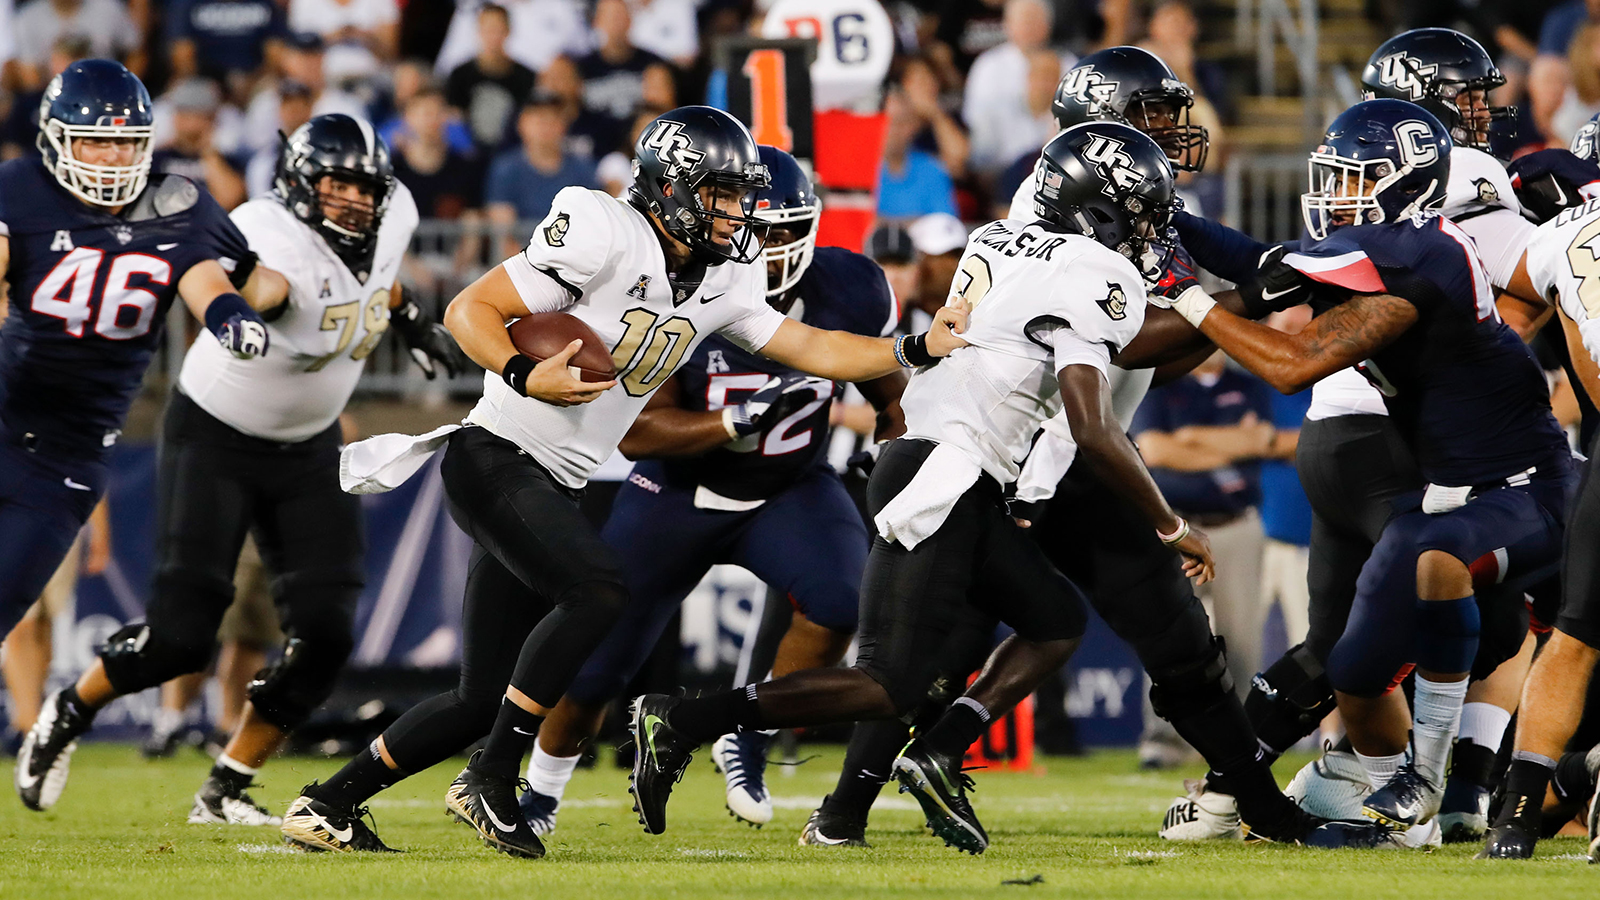 McKenzie Milton's 5 TDs pave way for No. 21 UCF's season-opening dismantling of UConn